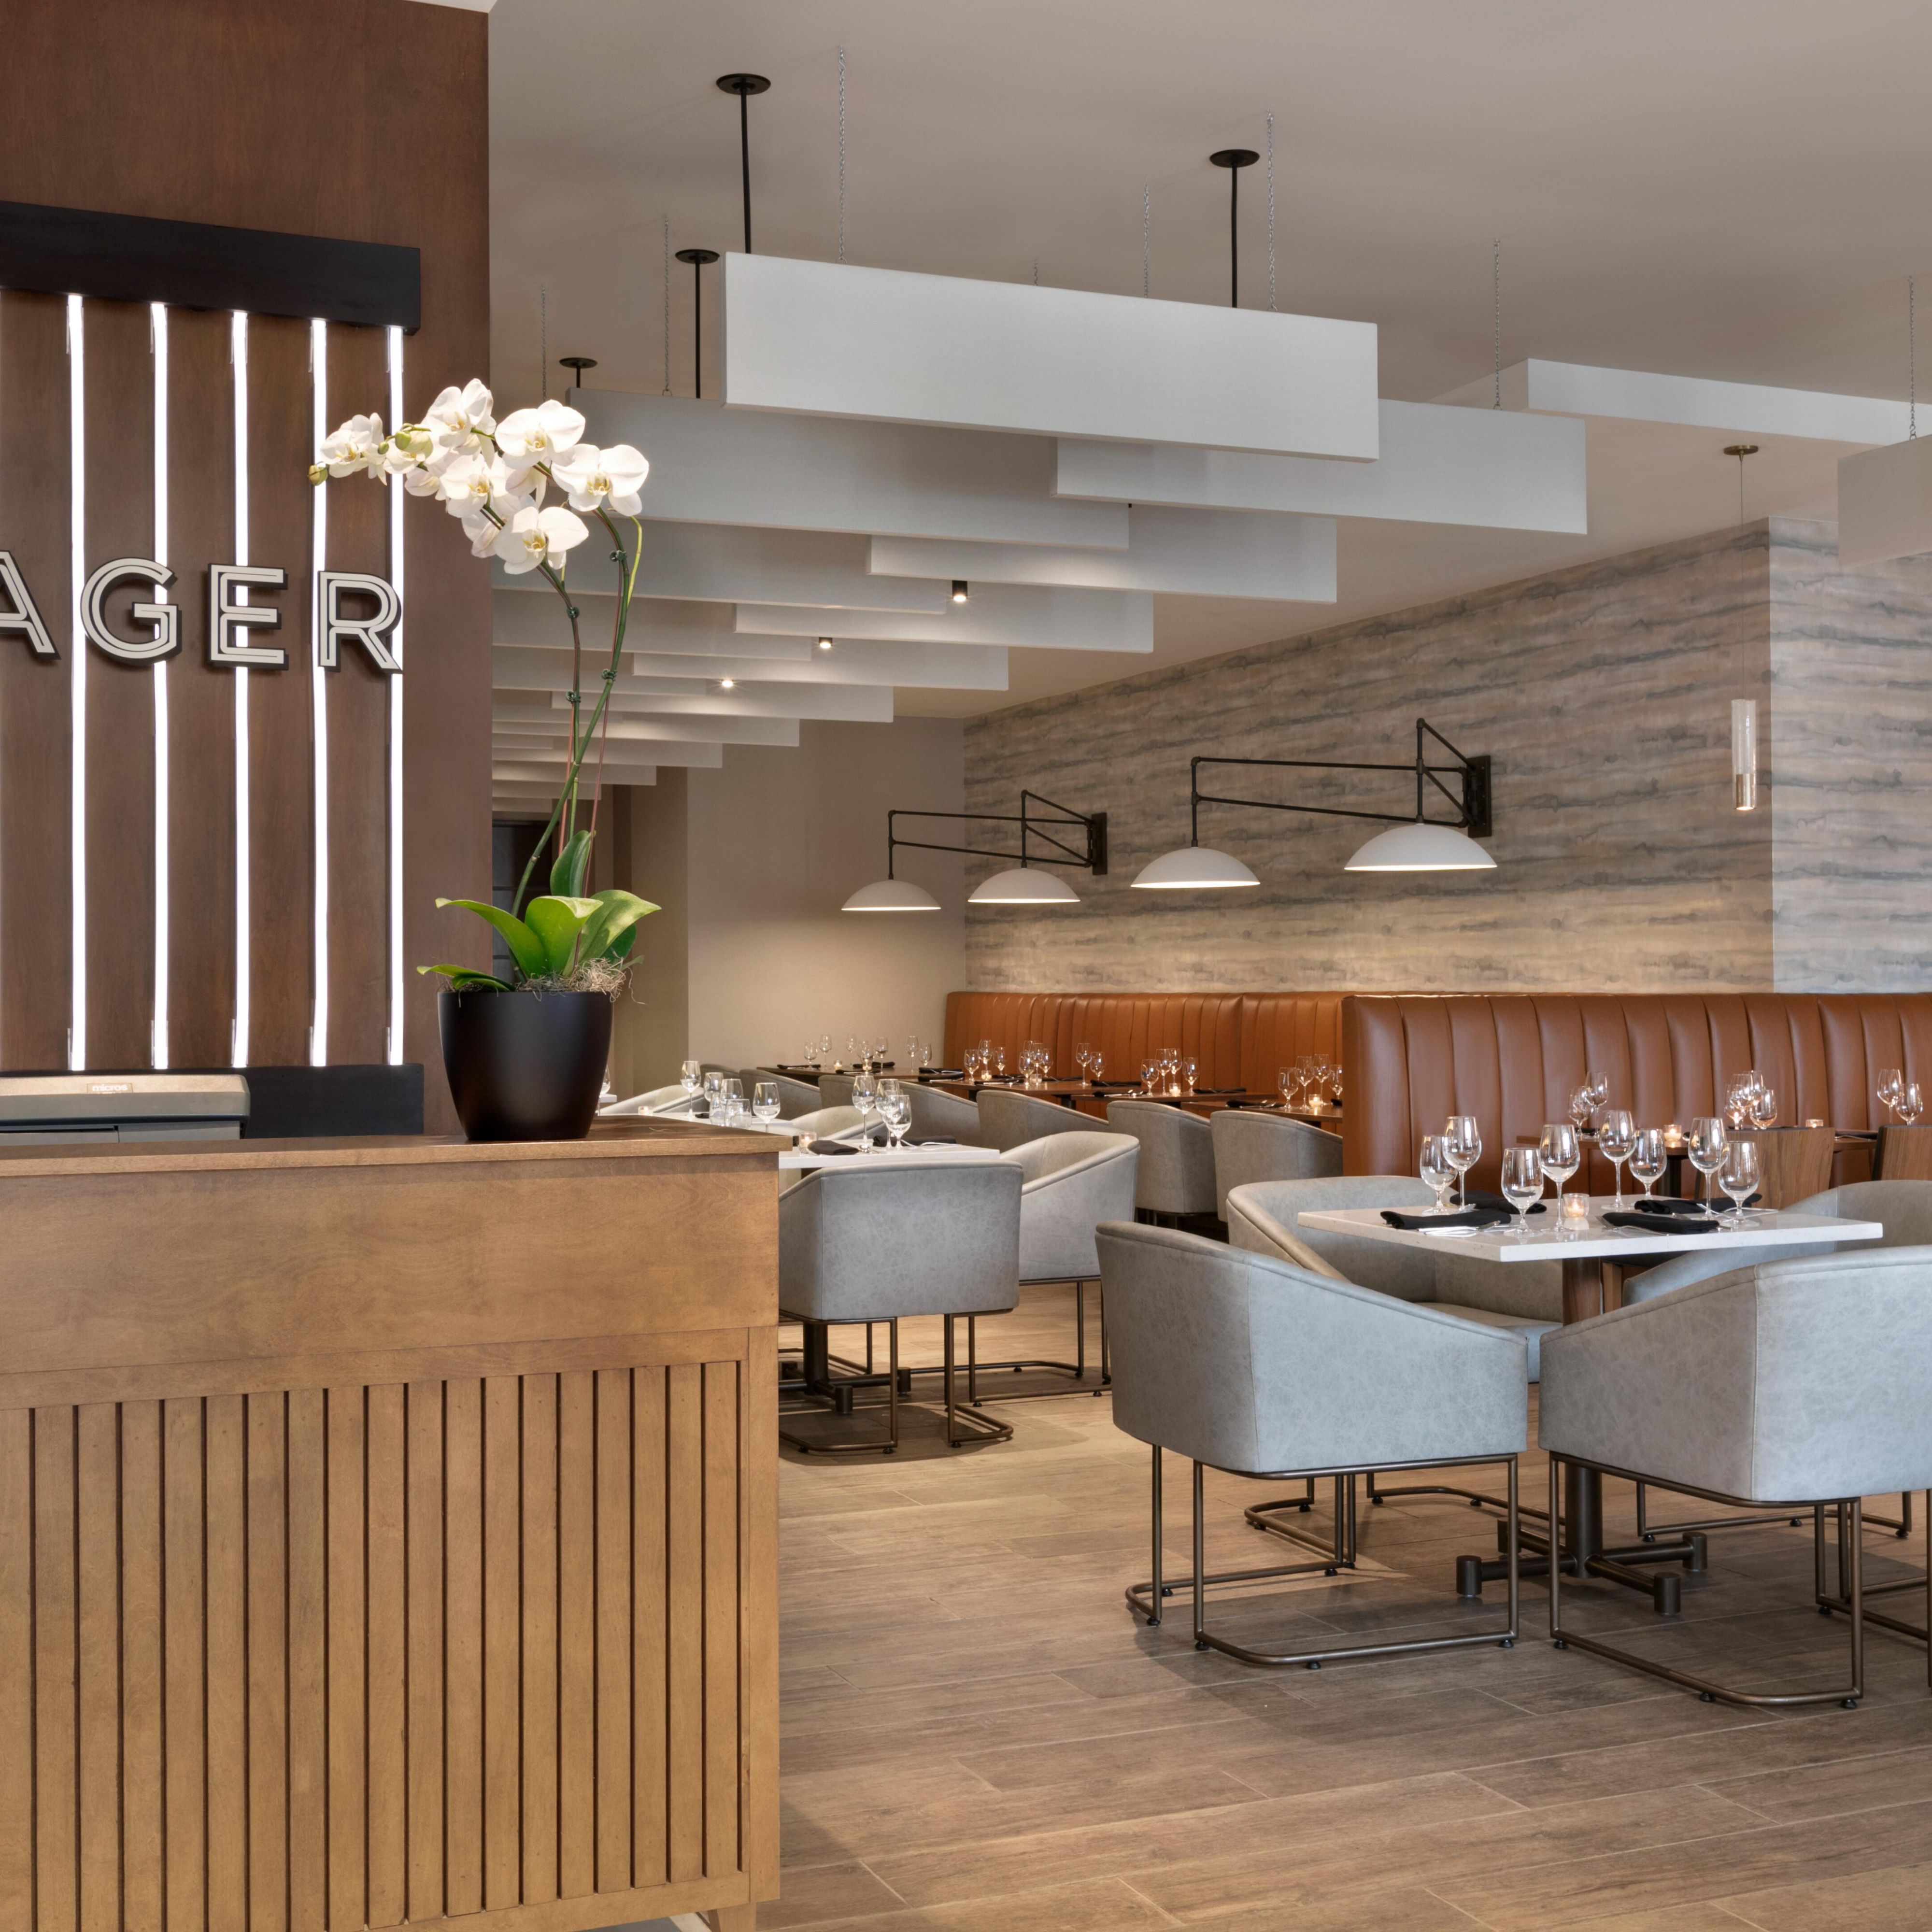 Enjoy breakfast, lunch and dinner at our new Forager Restaurant